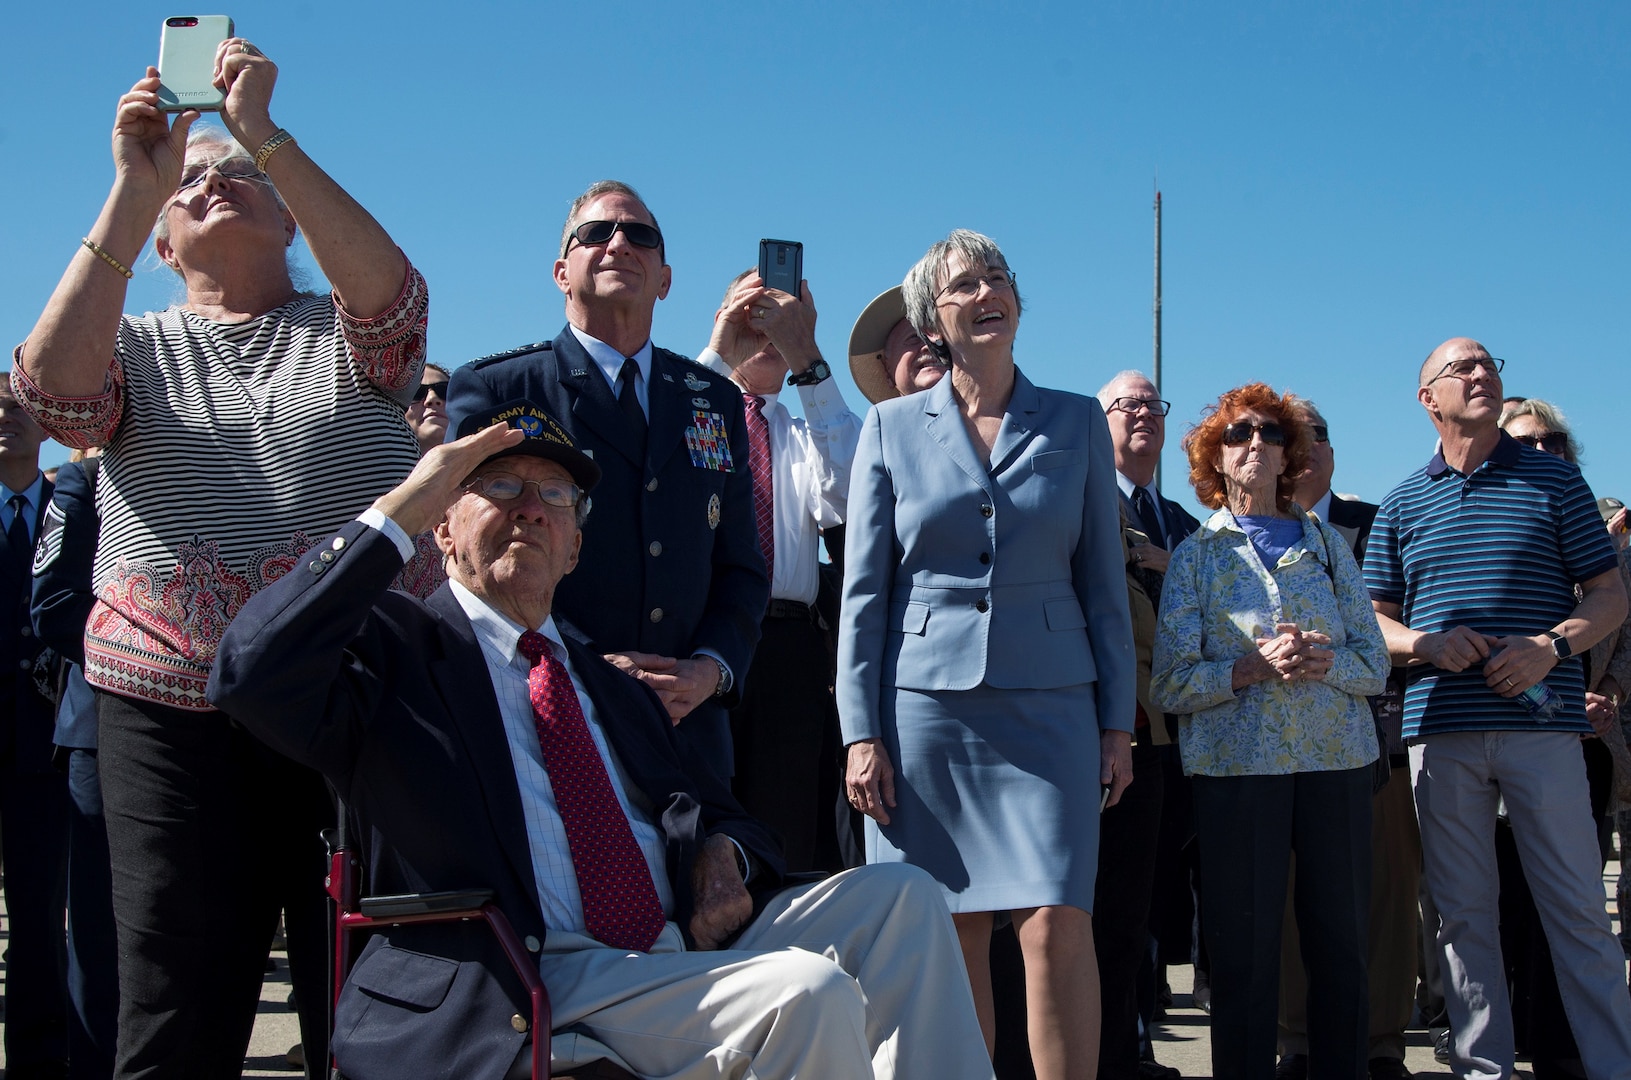 Secretary of the Air Force Heather Wilson, U.S. Air Force Chief of Staff Gen. David L. Goldfein and memorial attendees watch flyover during a memorial service celebrating the life of retired U.S. Air Force Lt. Col. Richard “Dick” E. Cole at Joint Base San Antonio-Randolph April 18. Cole, the last surviving Doolittle Raider, was the co-pilot on a B-25 Mitchell for then-Col. Jimmy Doolittle during the storied World War II Doolittle Tokyo Raid.